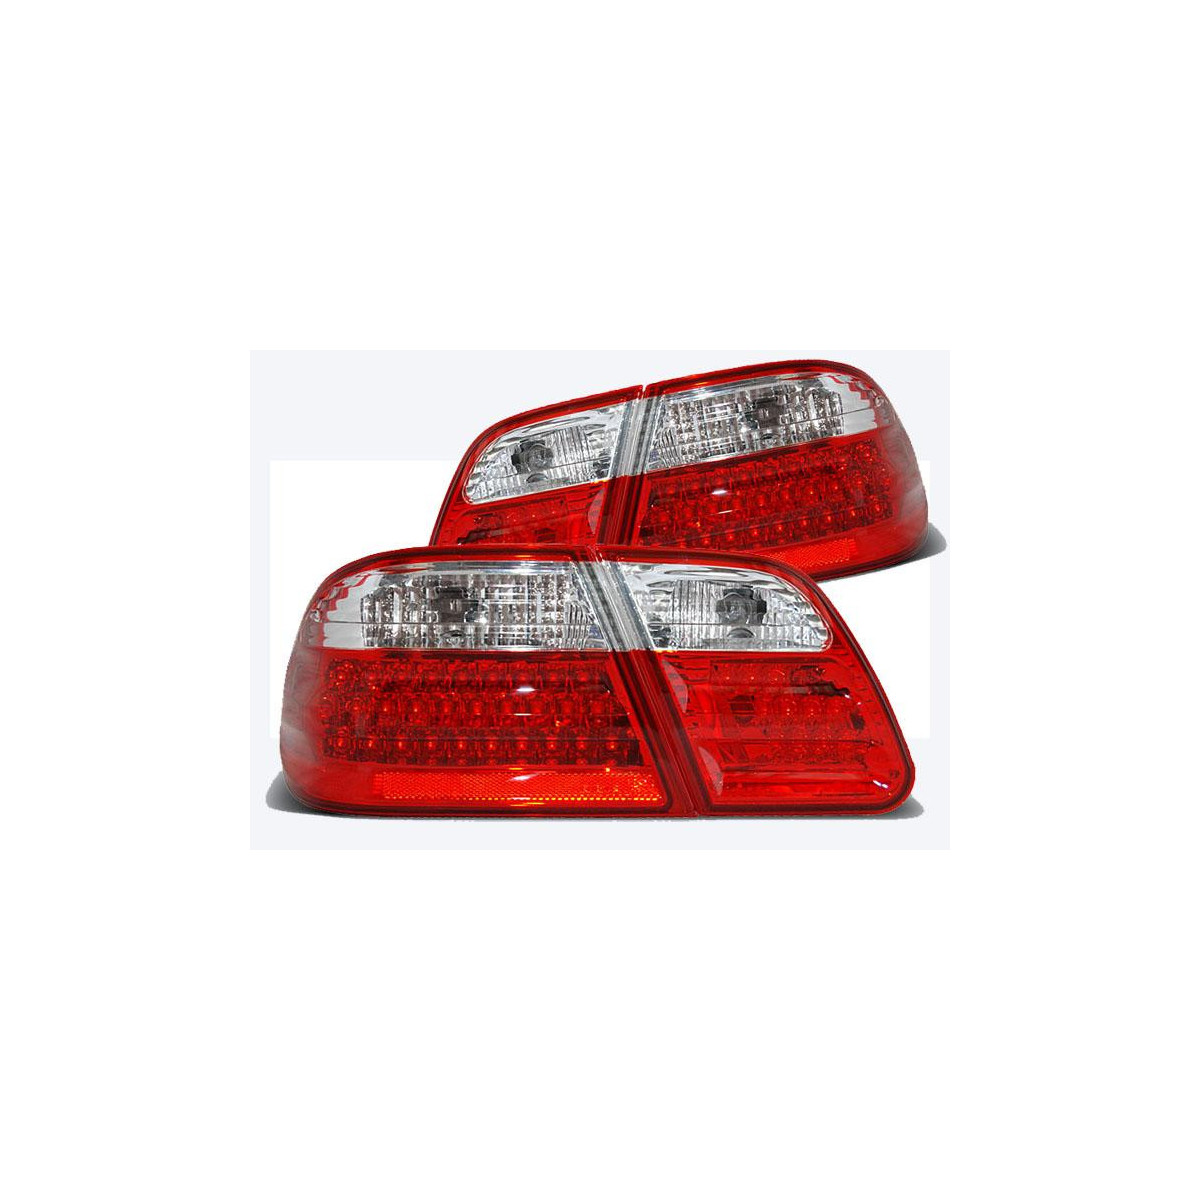 LAMPY LED MERCEDES W210 95-03.02 RED WHITE